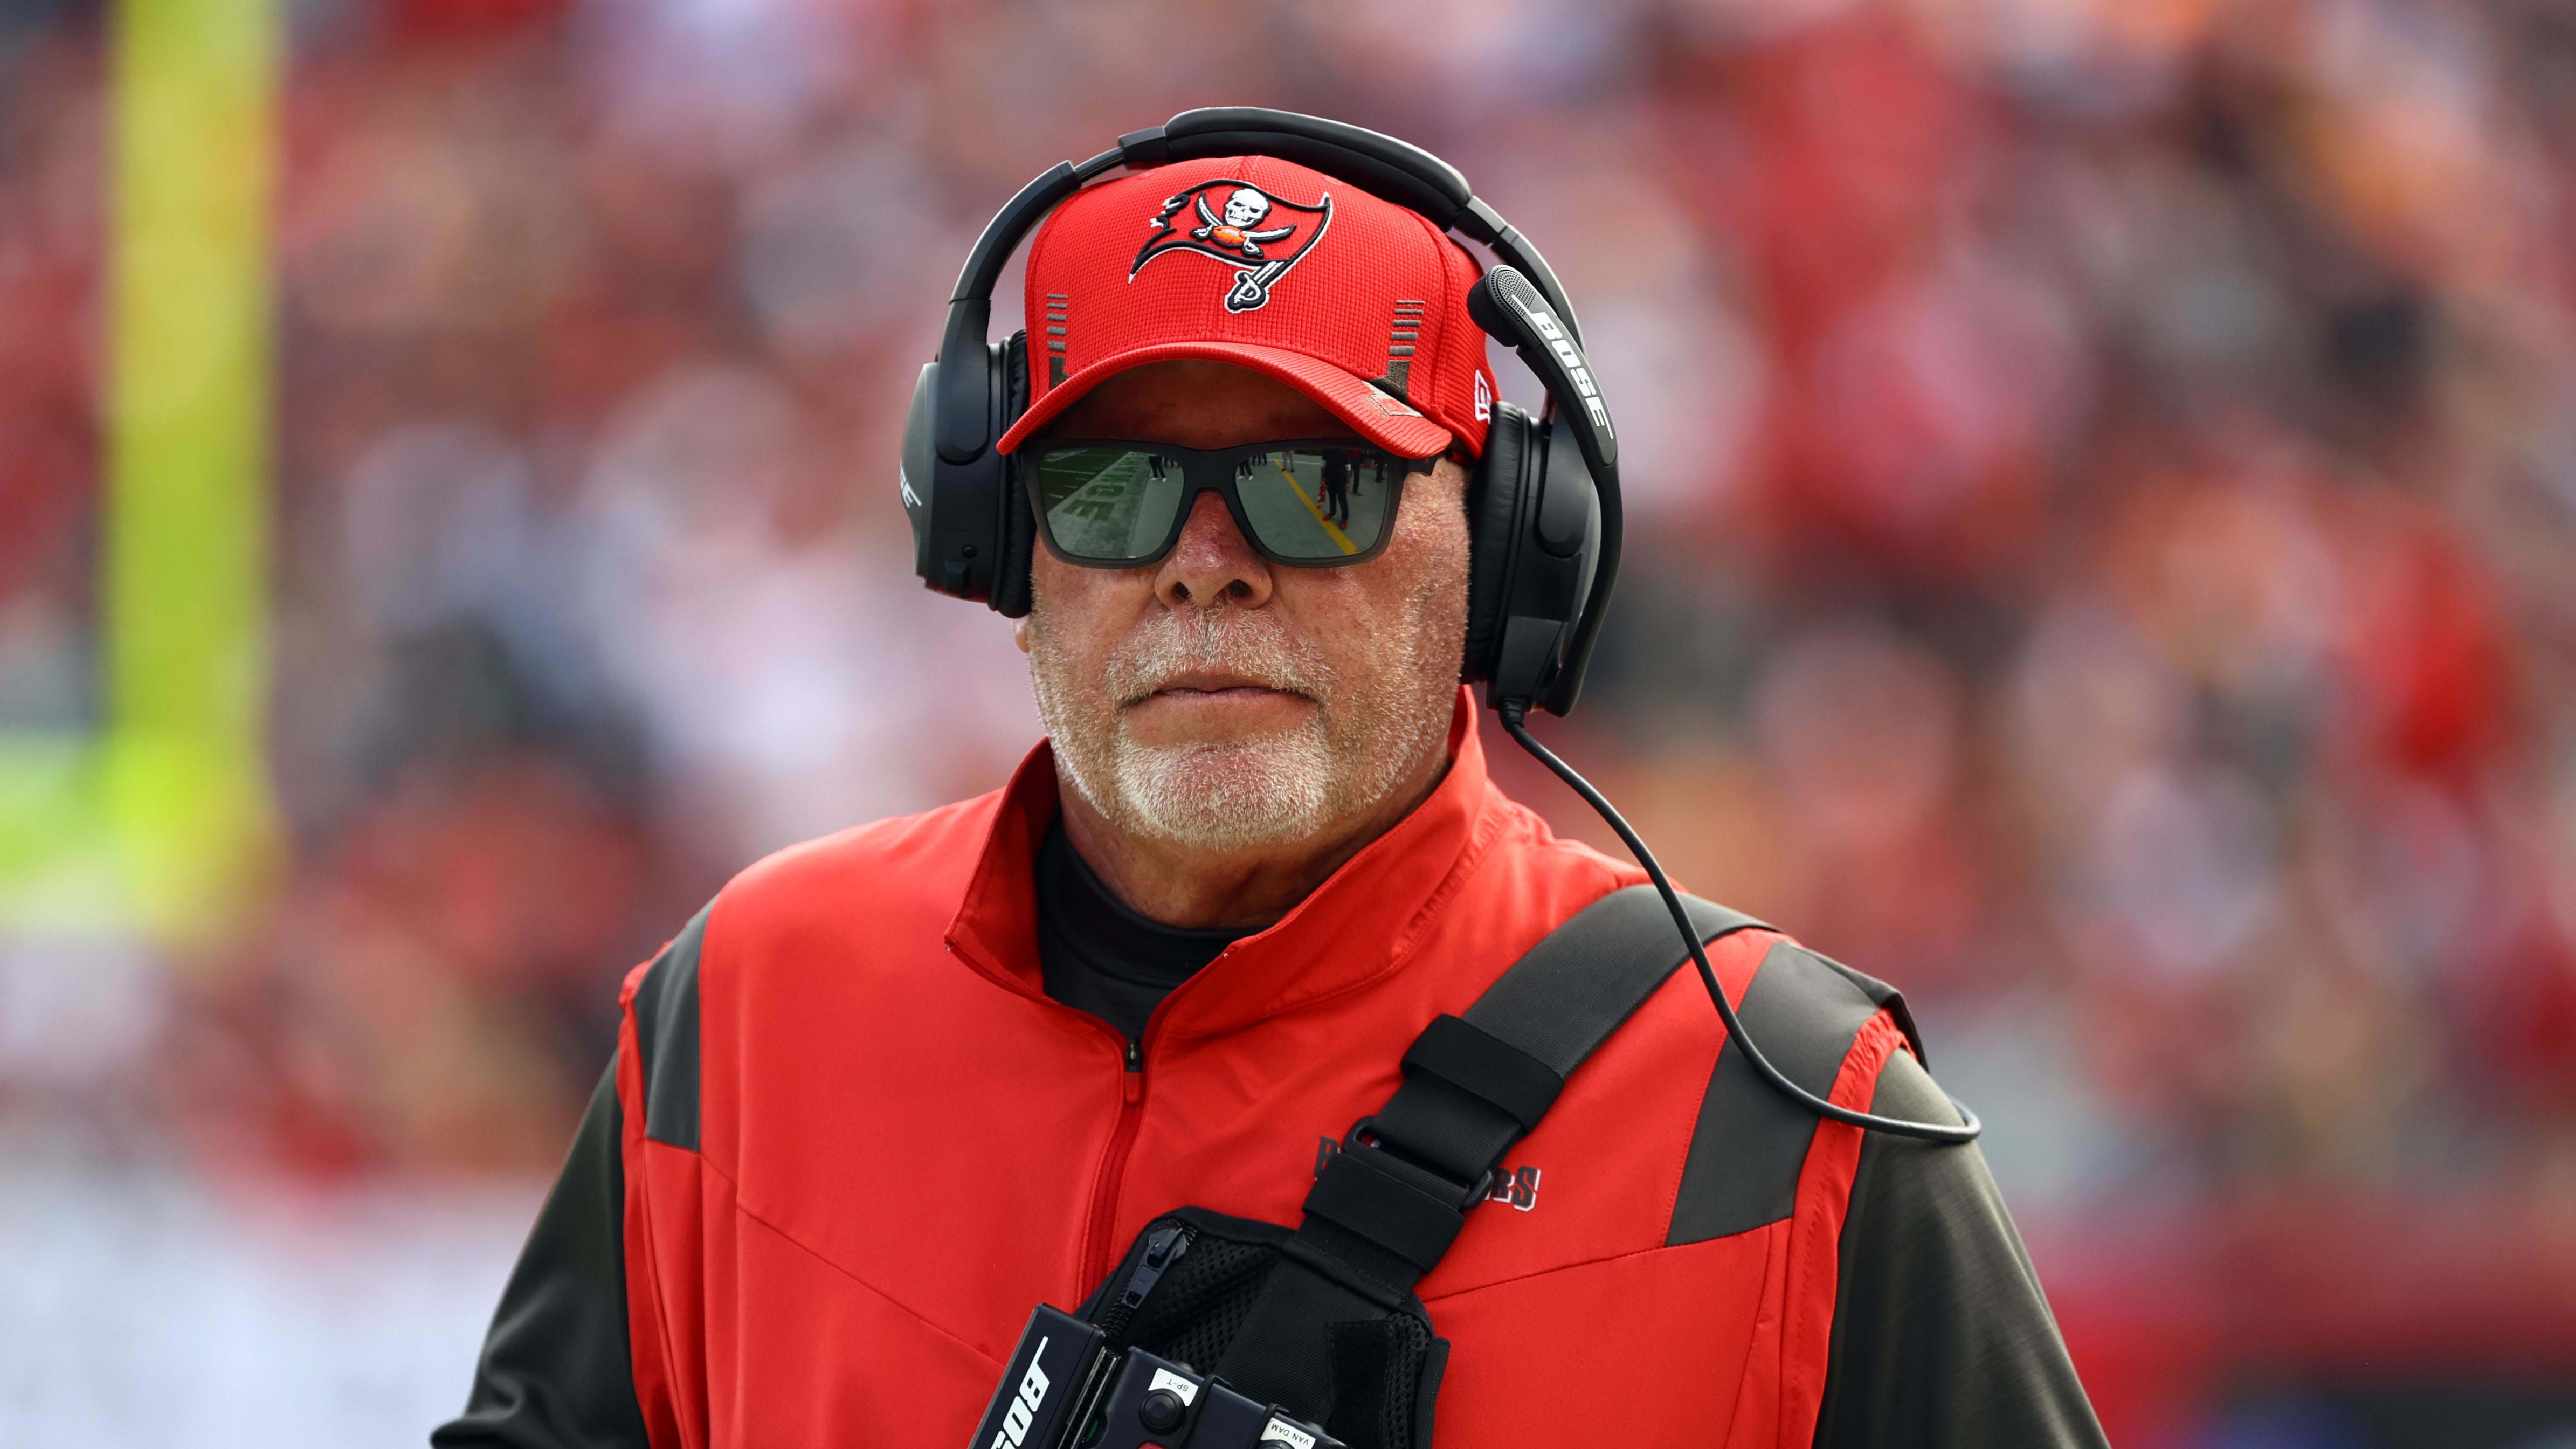 Sports Club of Tampa Bay to Honor Former Tampa Bay Buccaneers Head Coach